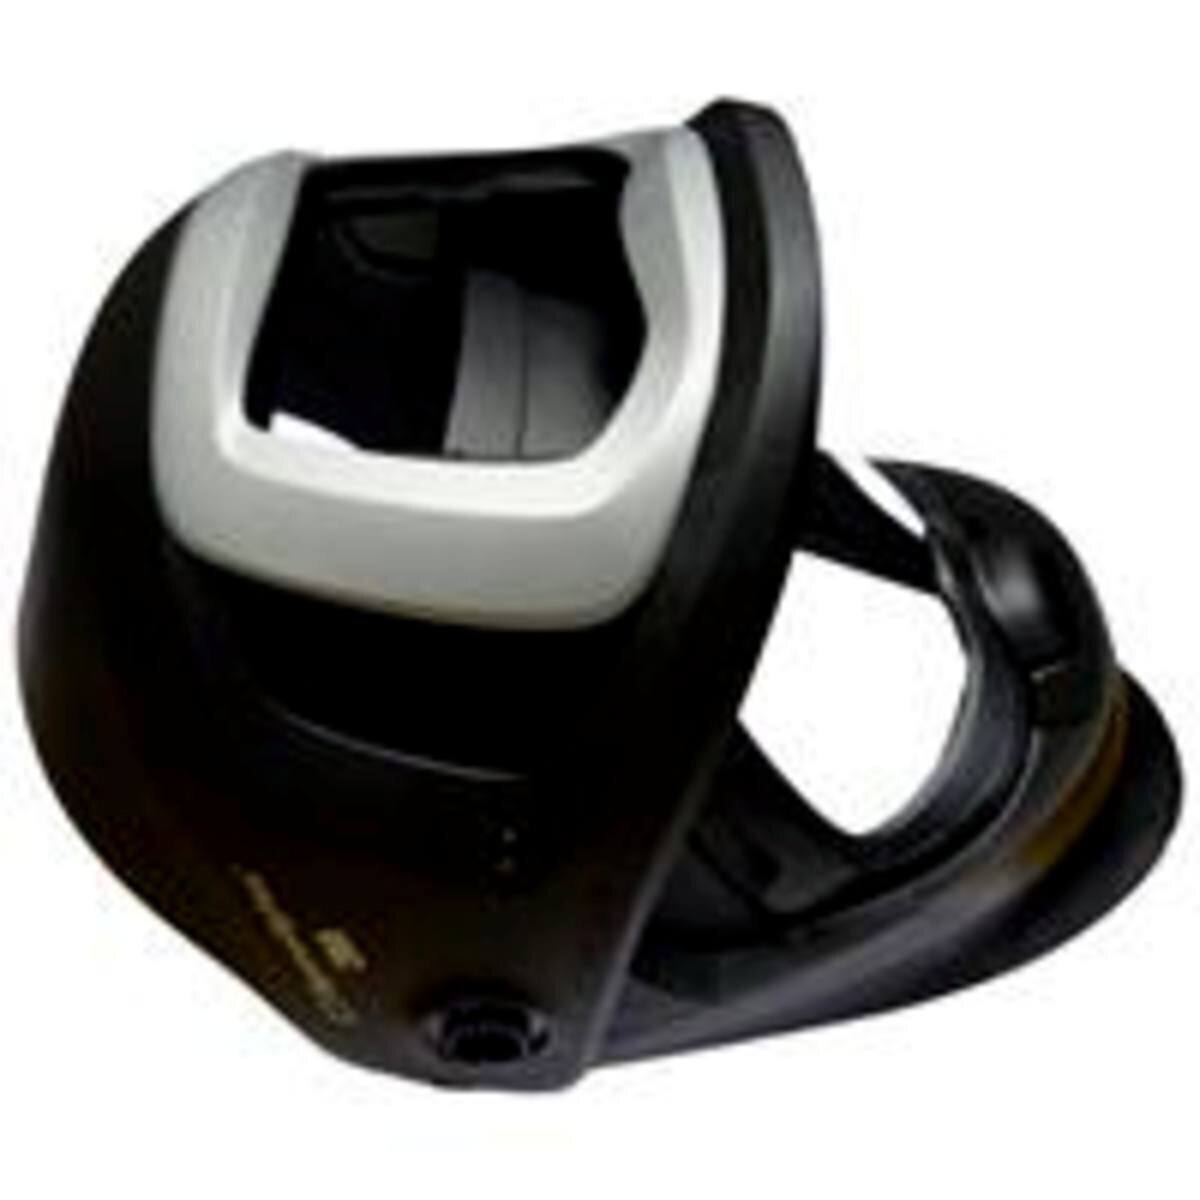 3M Speedglas welding mask 9100 FX Air without ADF automatic welding filter, with side window, without headband #541890